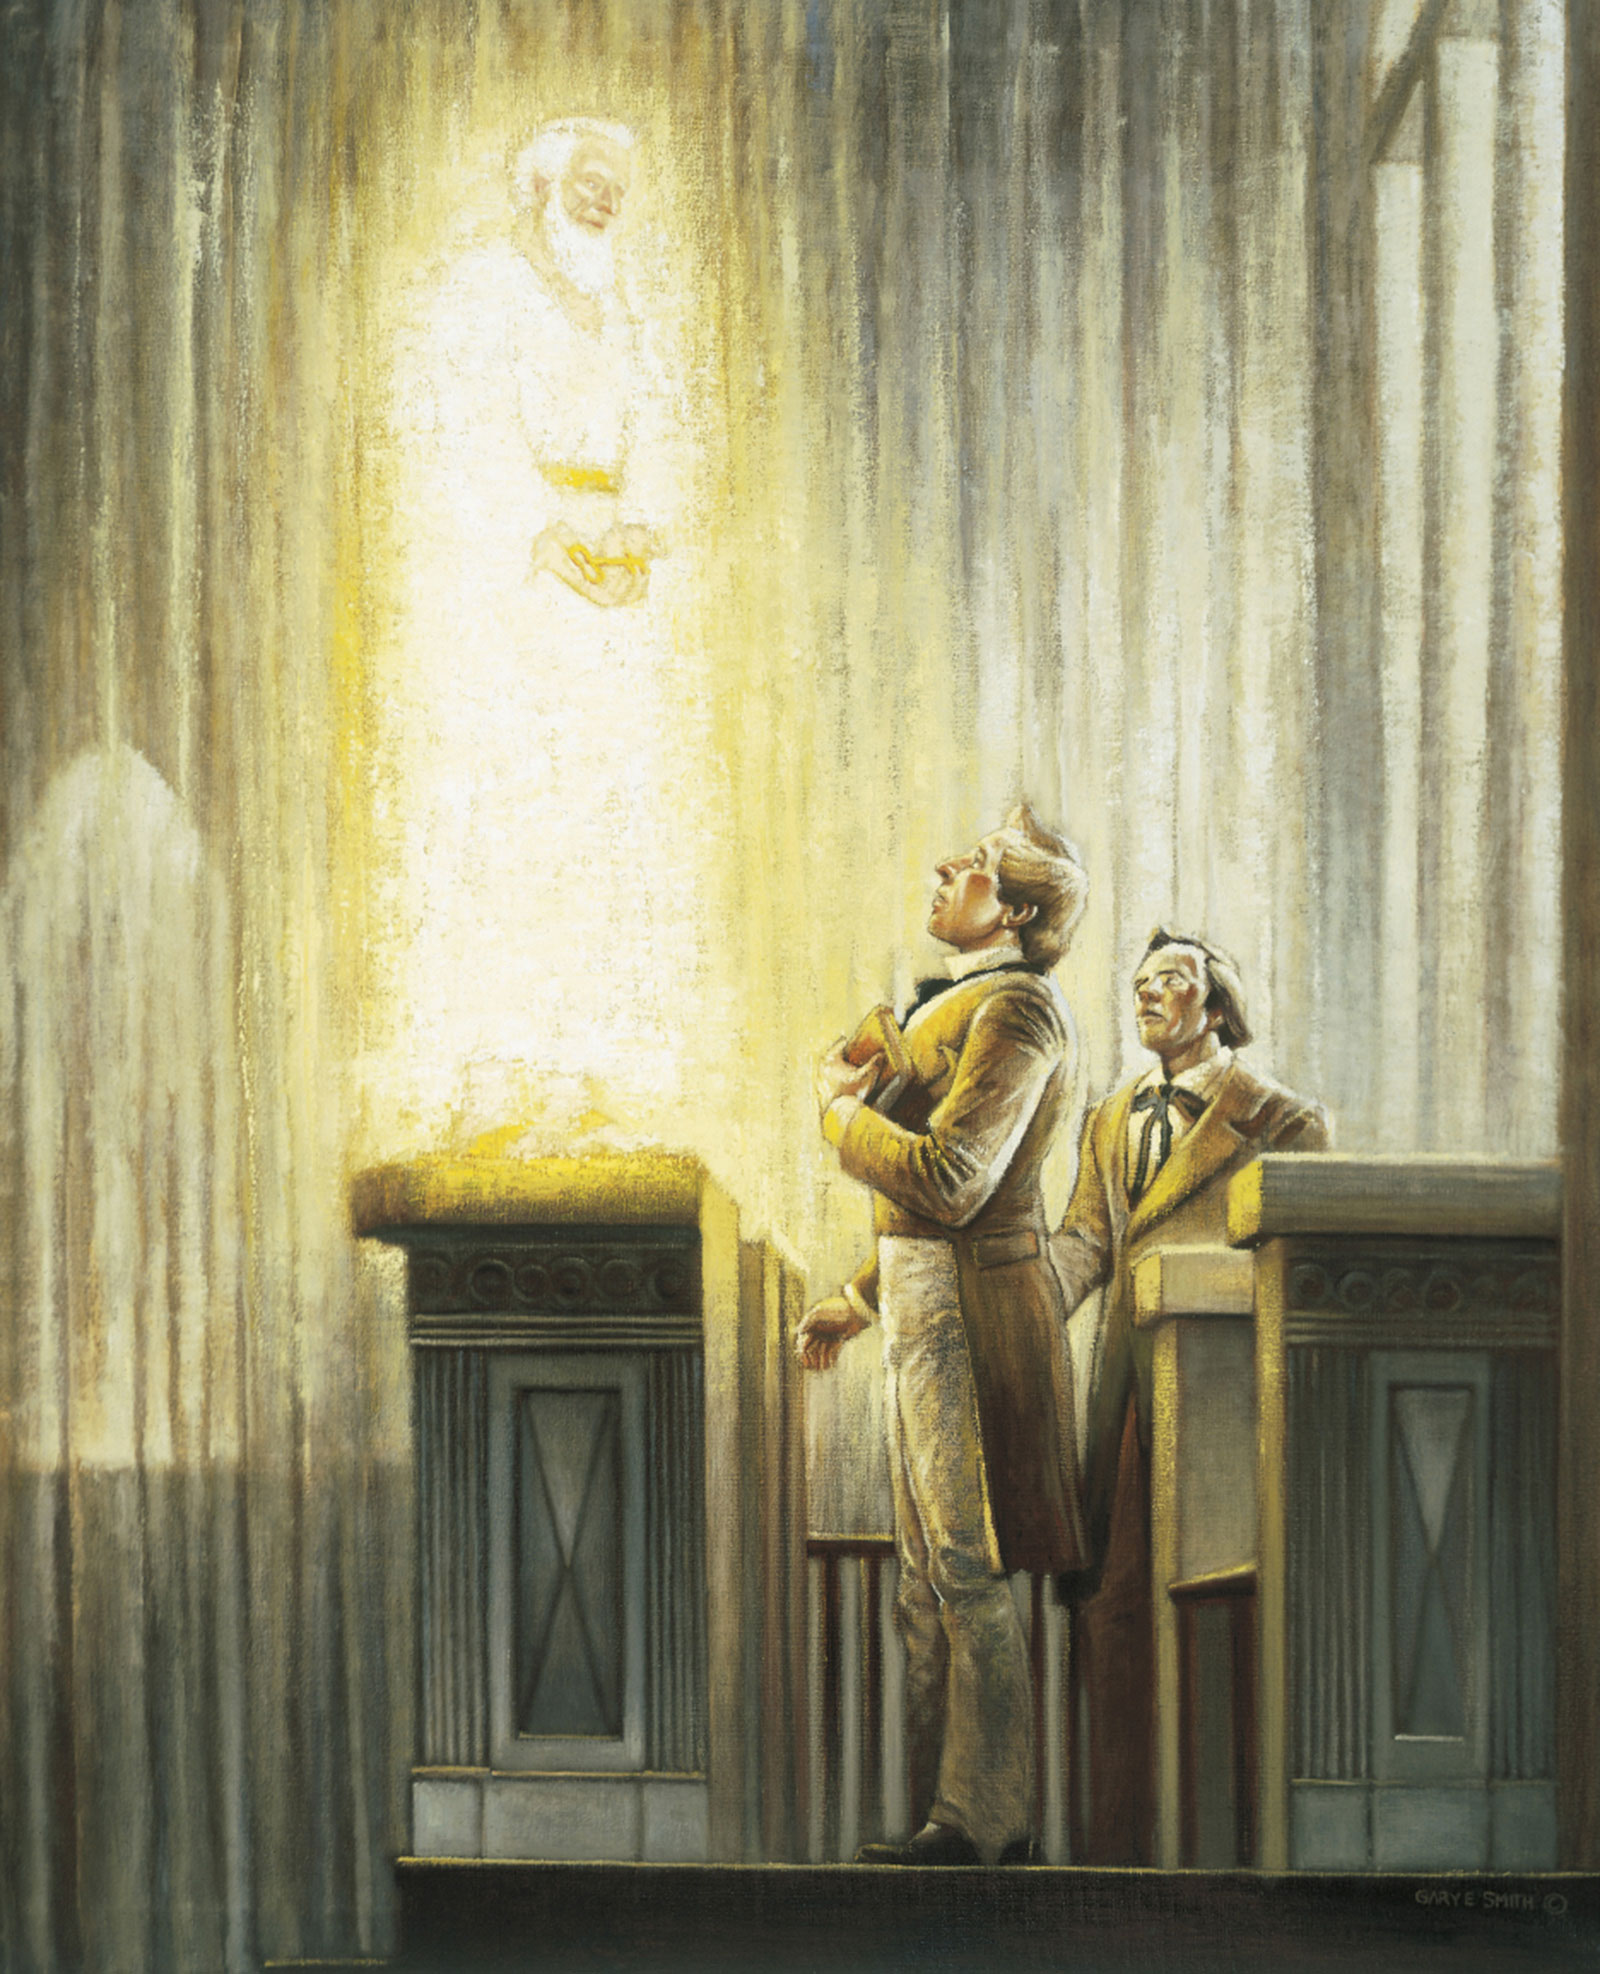 A painting. From the side we see Elijah standing above the Sacrament table in the Kirtland Temple. Joseph Smith and Oliver Cowdery, stand behind the table, looking up at him. Behind all the figures is a veil separating them from the rest of the temple. 